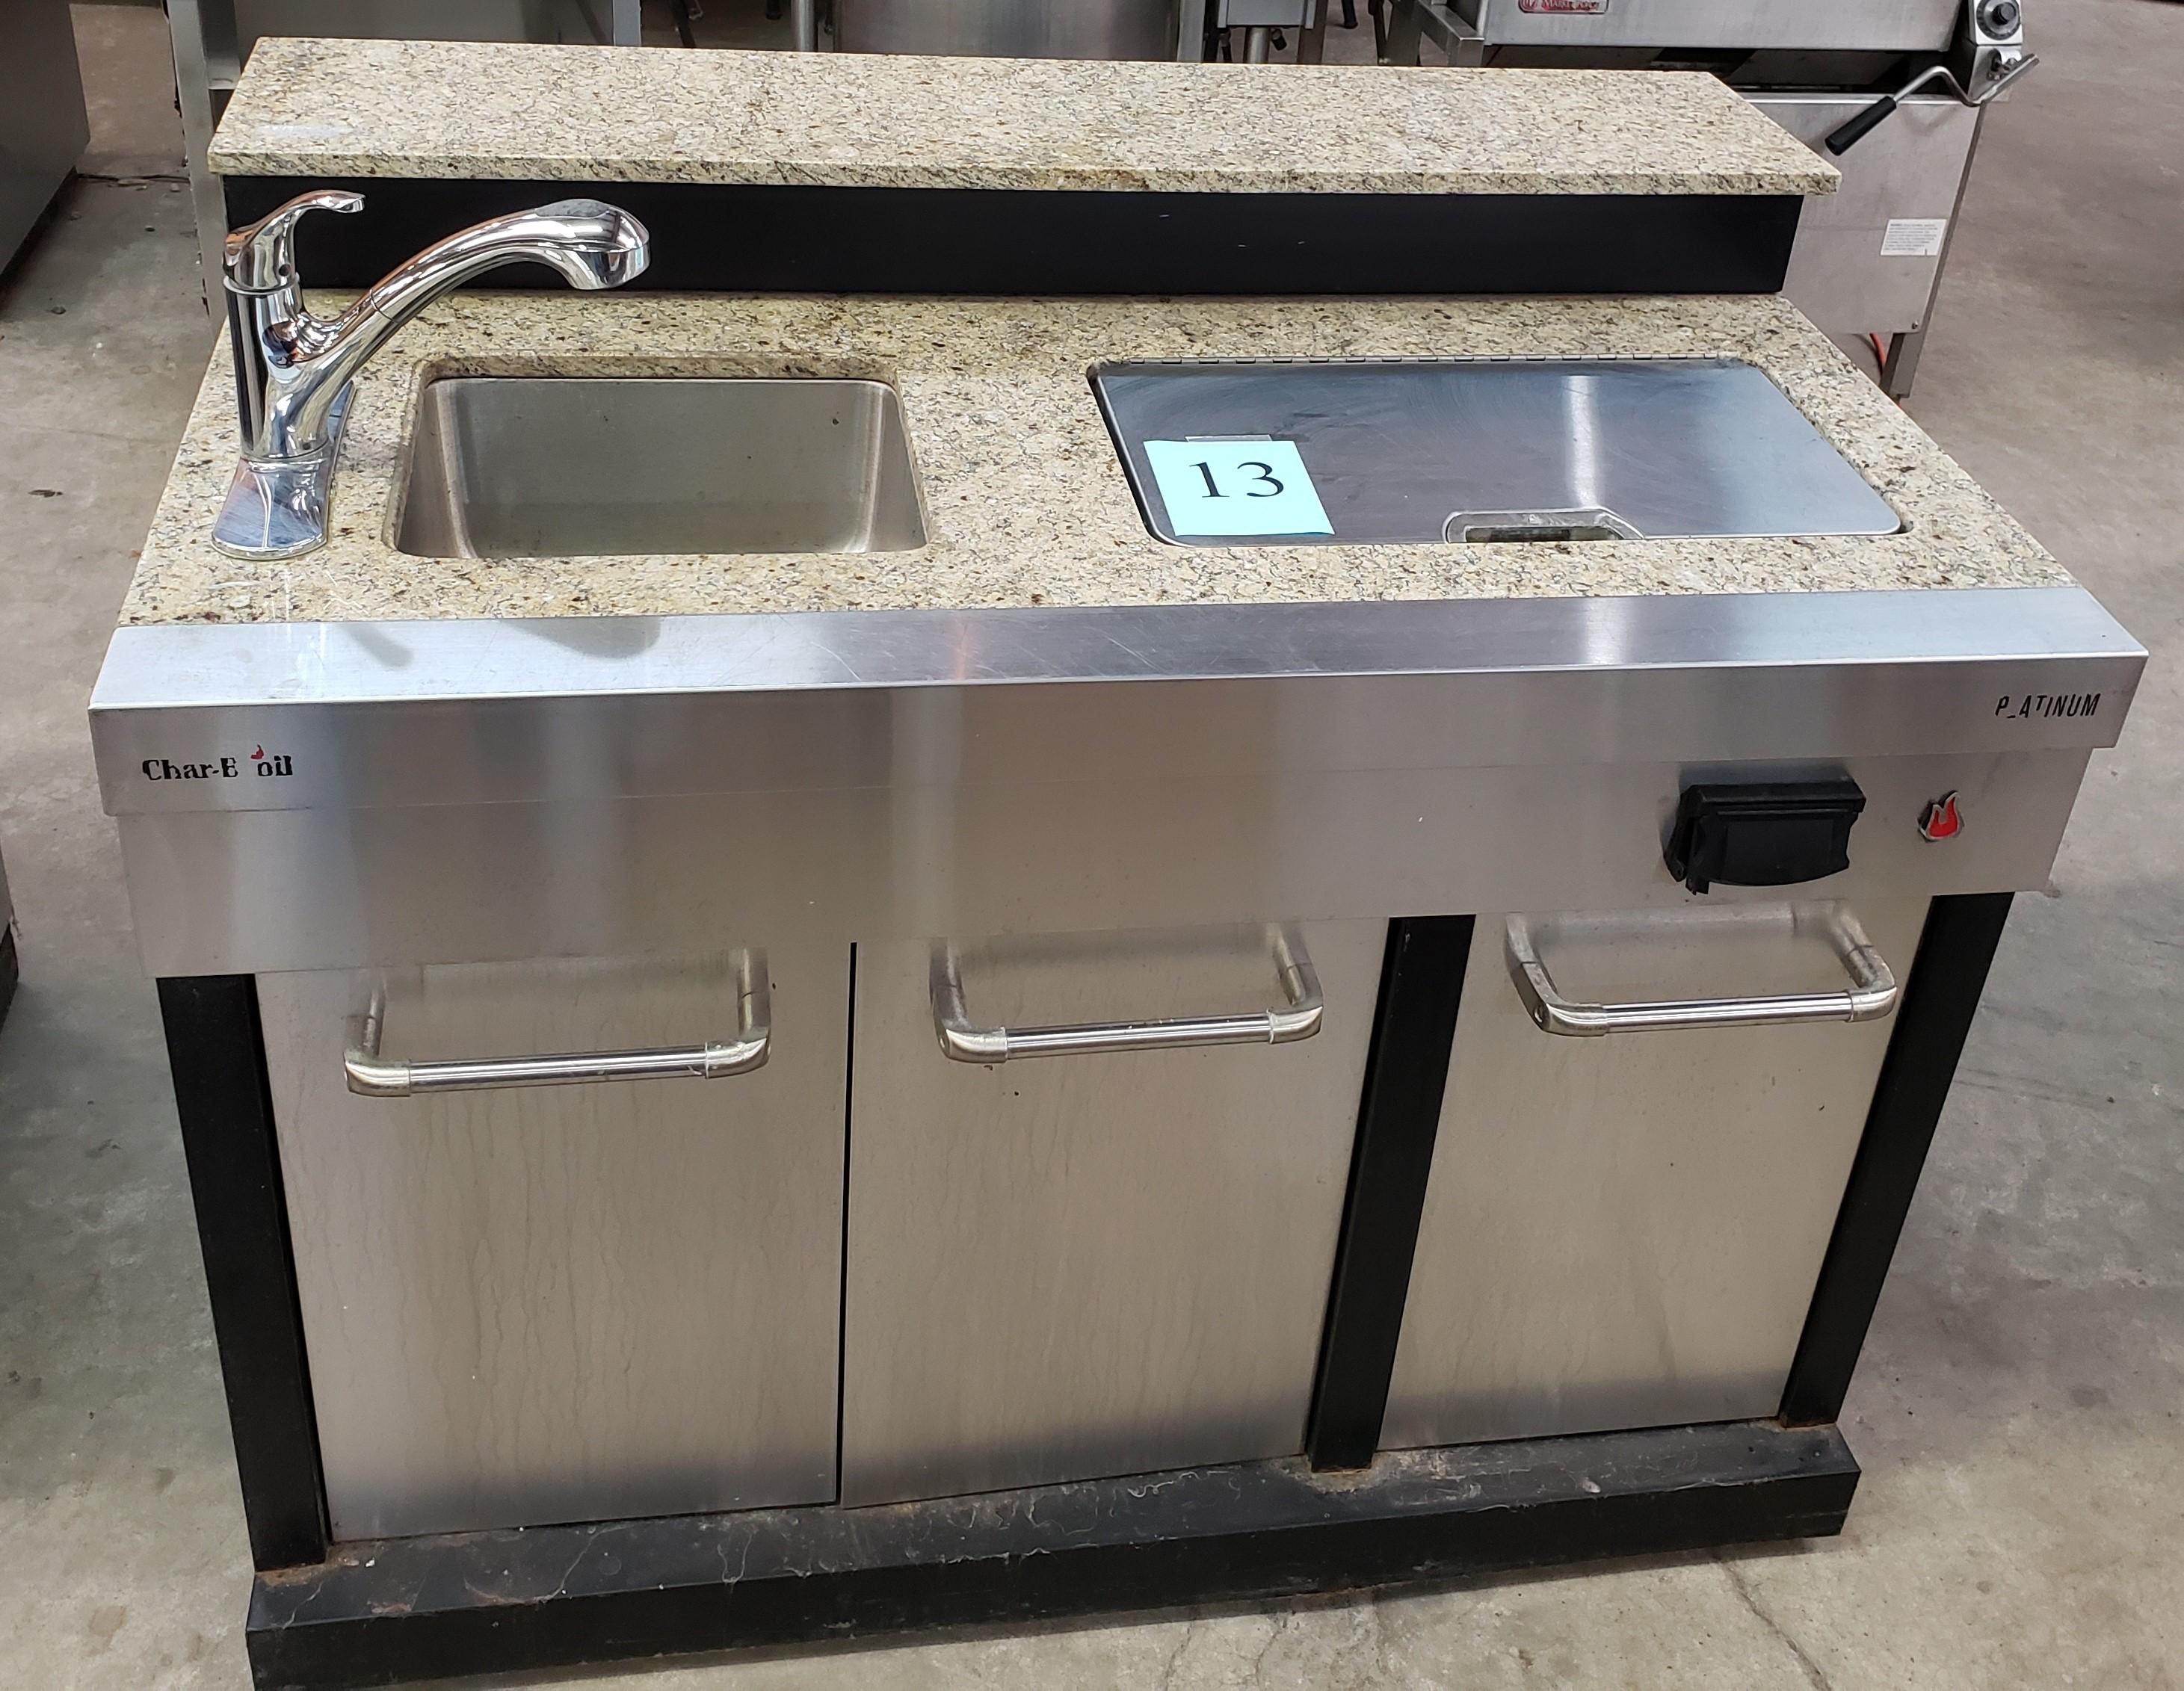 CHAR-BOIL OUTDOOR SINK WITH BUILT-IN COOLER